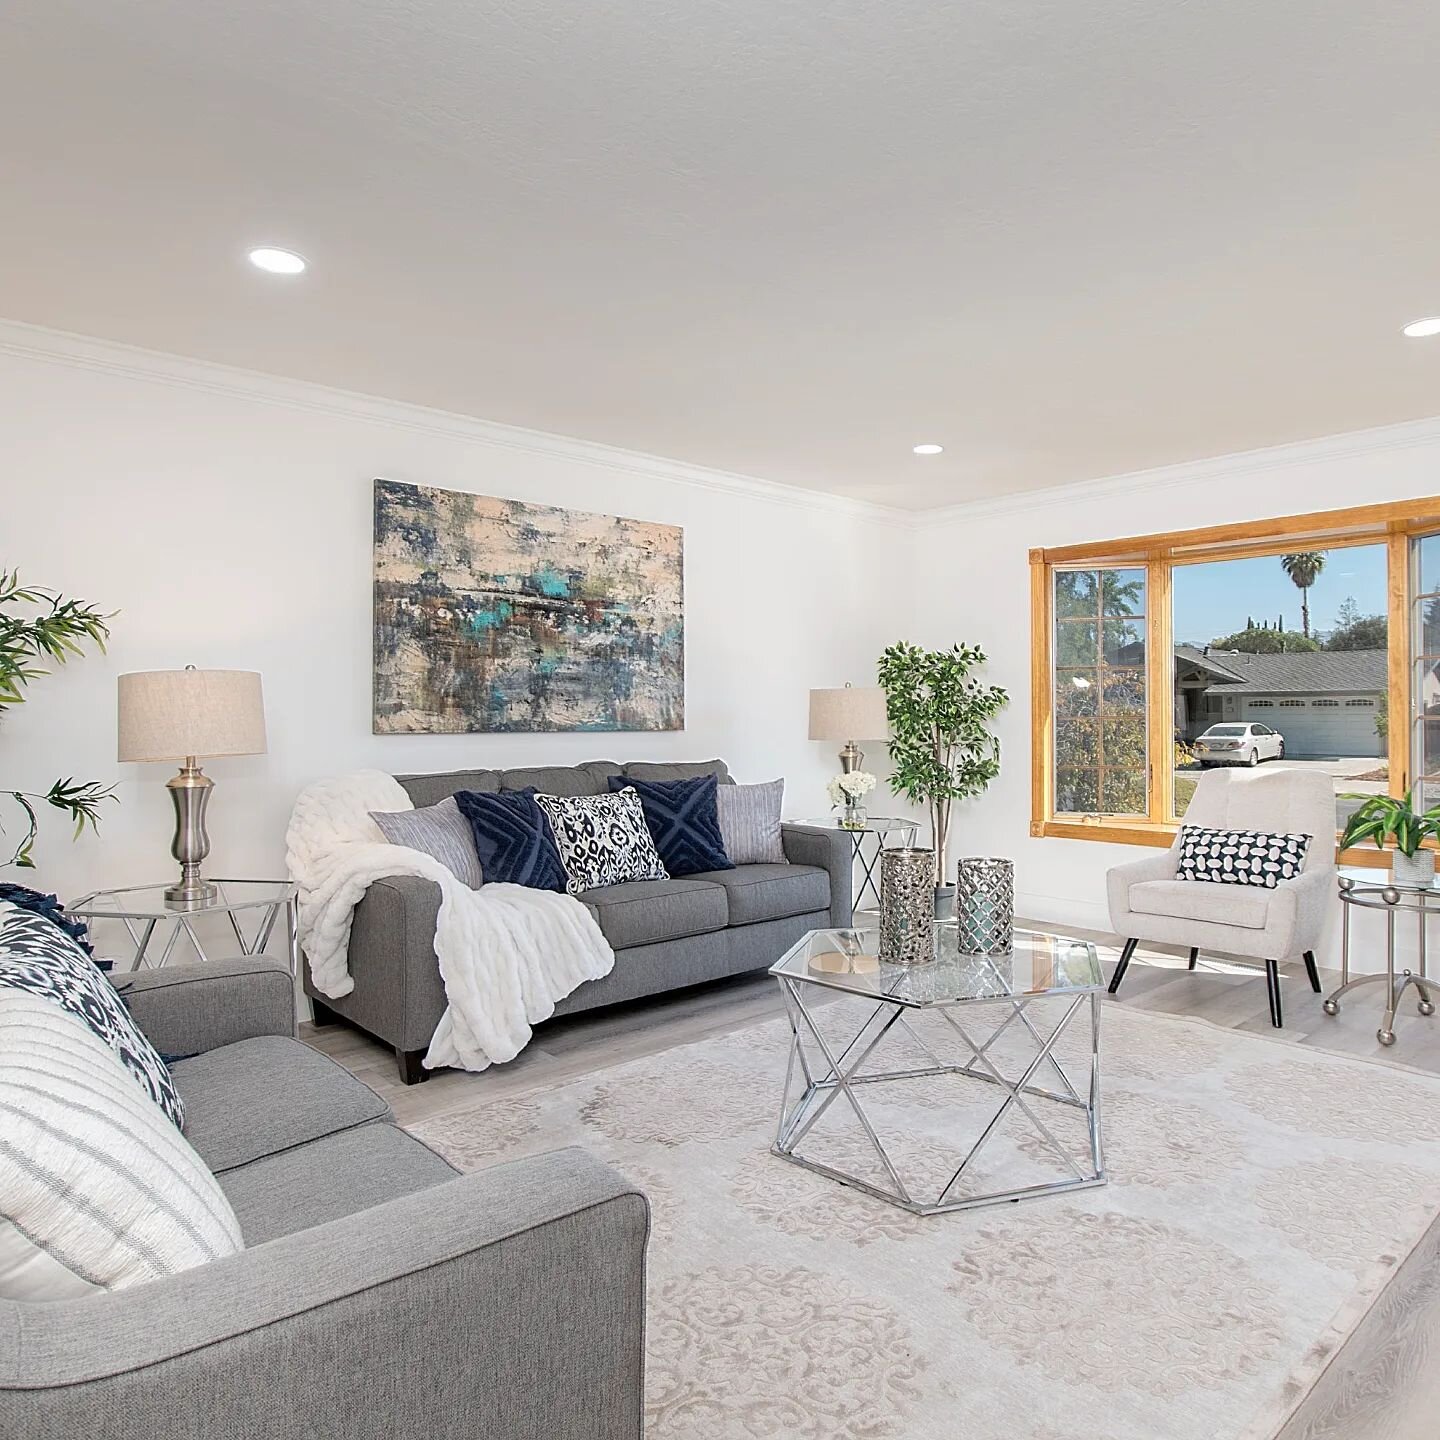 Available now- 3997 Lemoyne Way Campbell 95008!

#365staging #staging #stager #homestager #homestaging #realestate #realestateagent #realestatestaging #realestatestager #listingagent #listing #milliondollarlisting #siliconvalleyhomes #siliconvalleyst